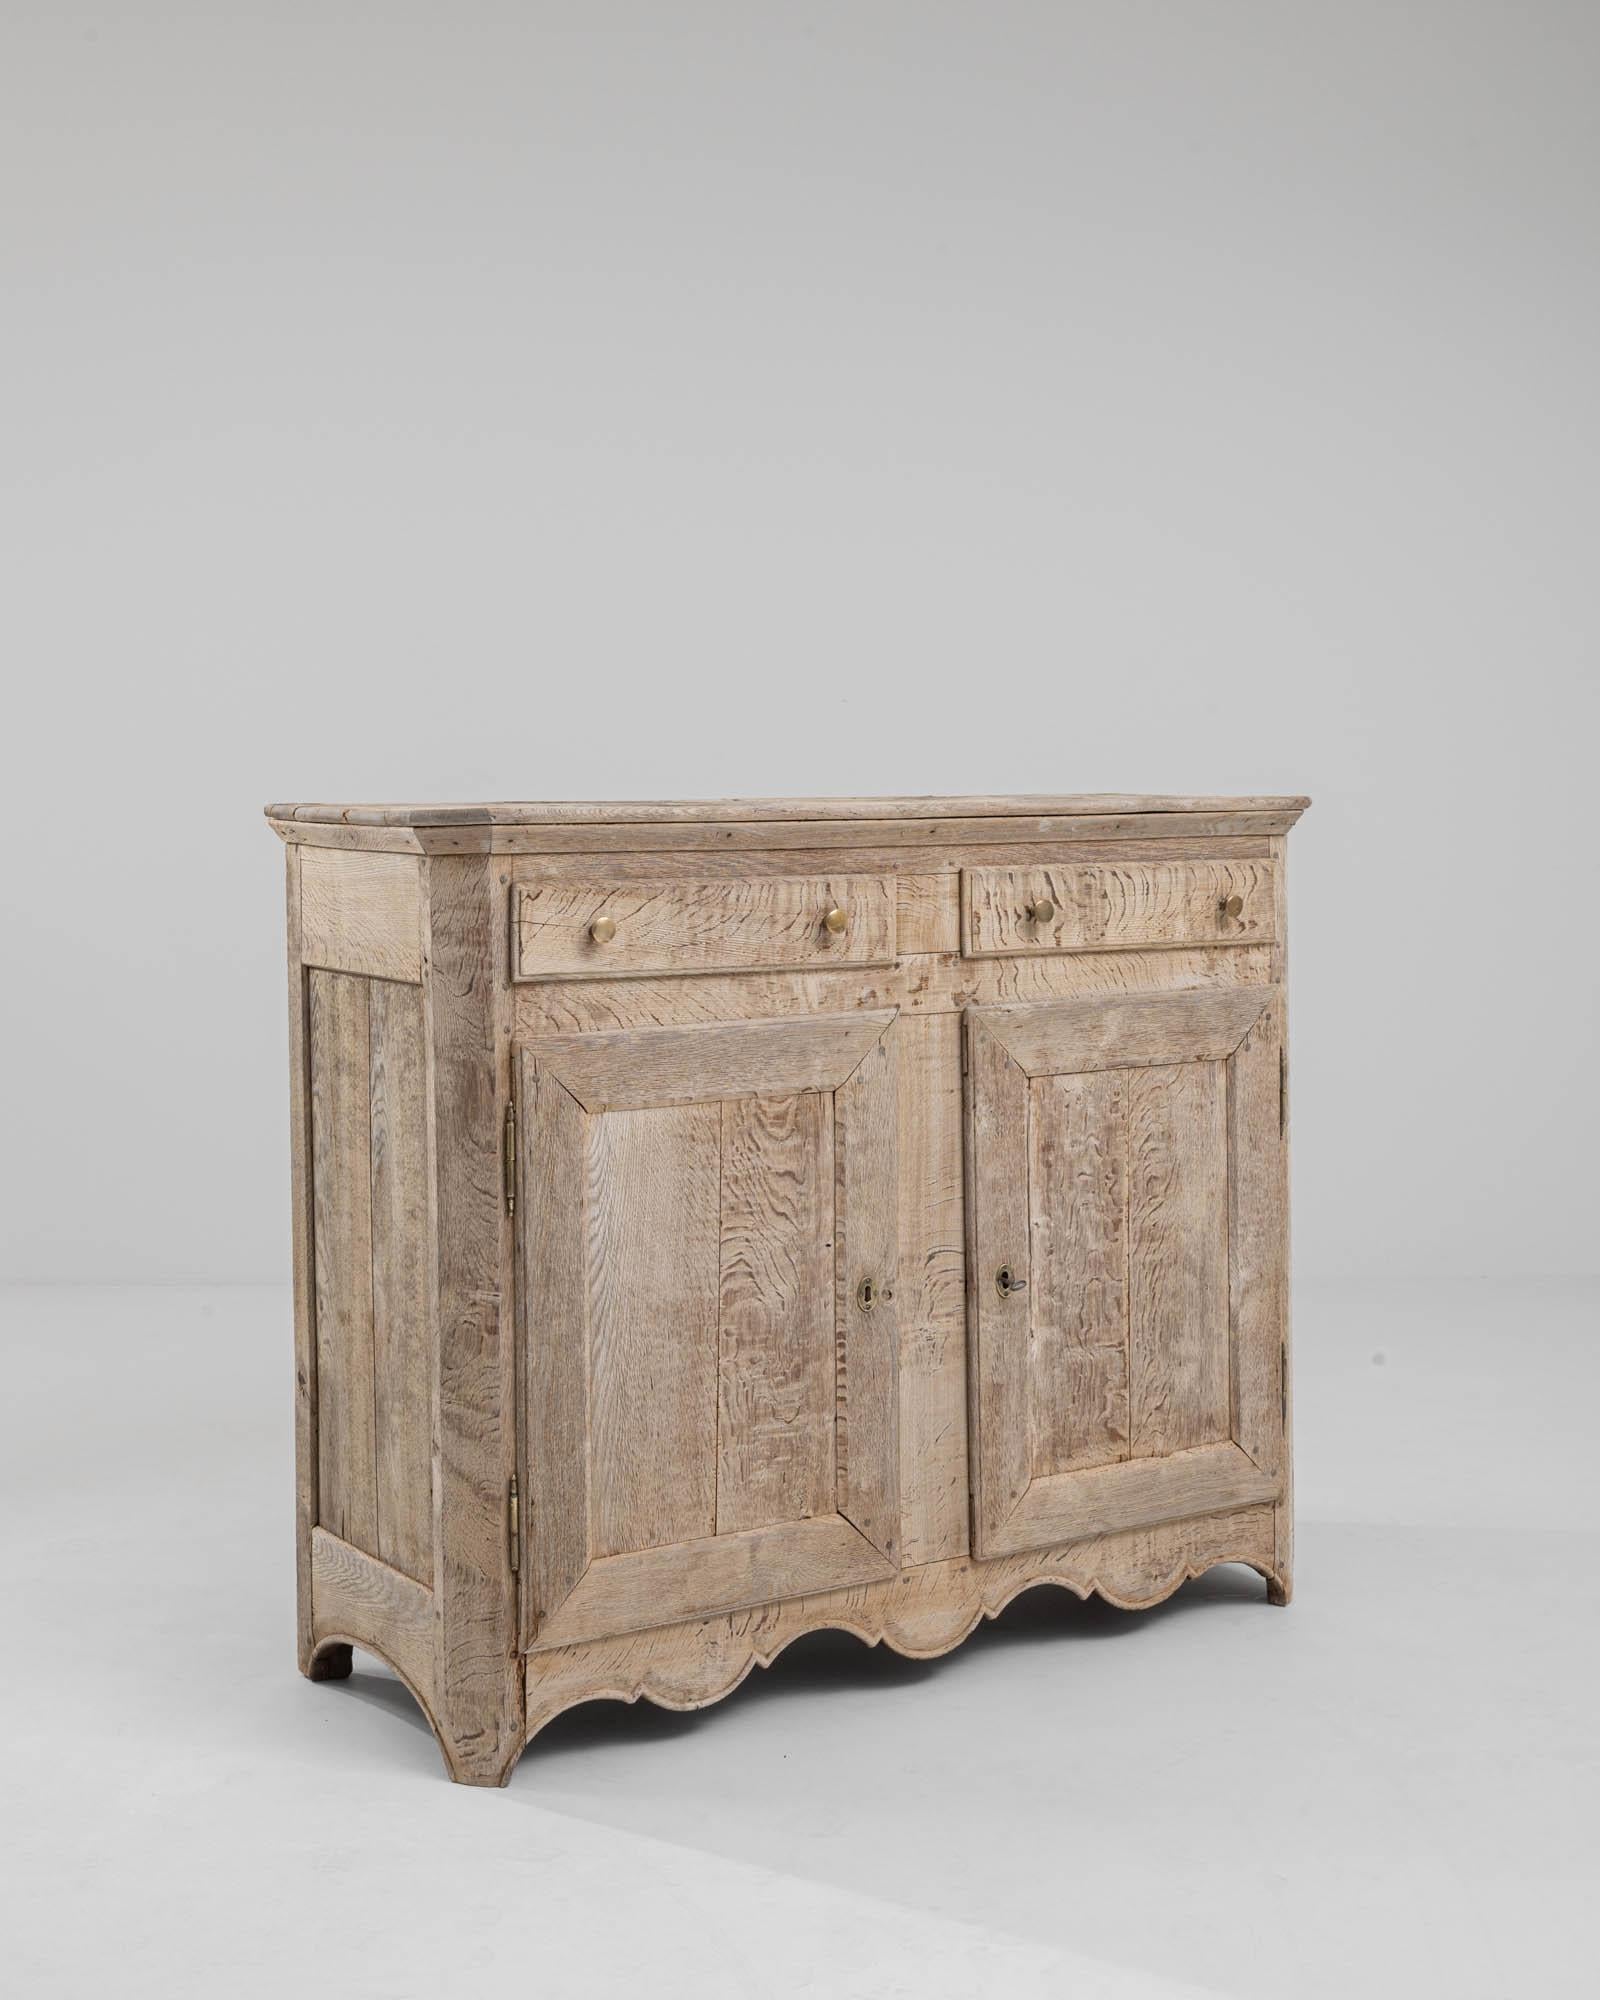 An oak buffet from 19th century, France. This wooden buffet – the finest expression of a wooden storage box– is composed with two paneled doors, an interior shelf, and two drawers fixed with brass pull knobs. A delicate bleaching process has been